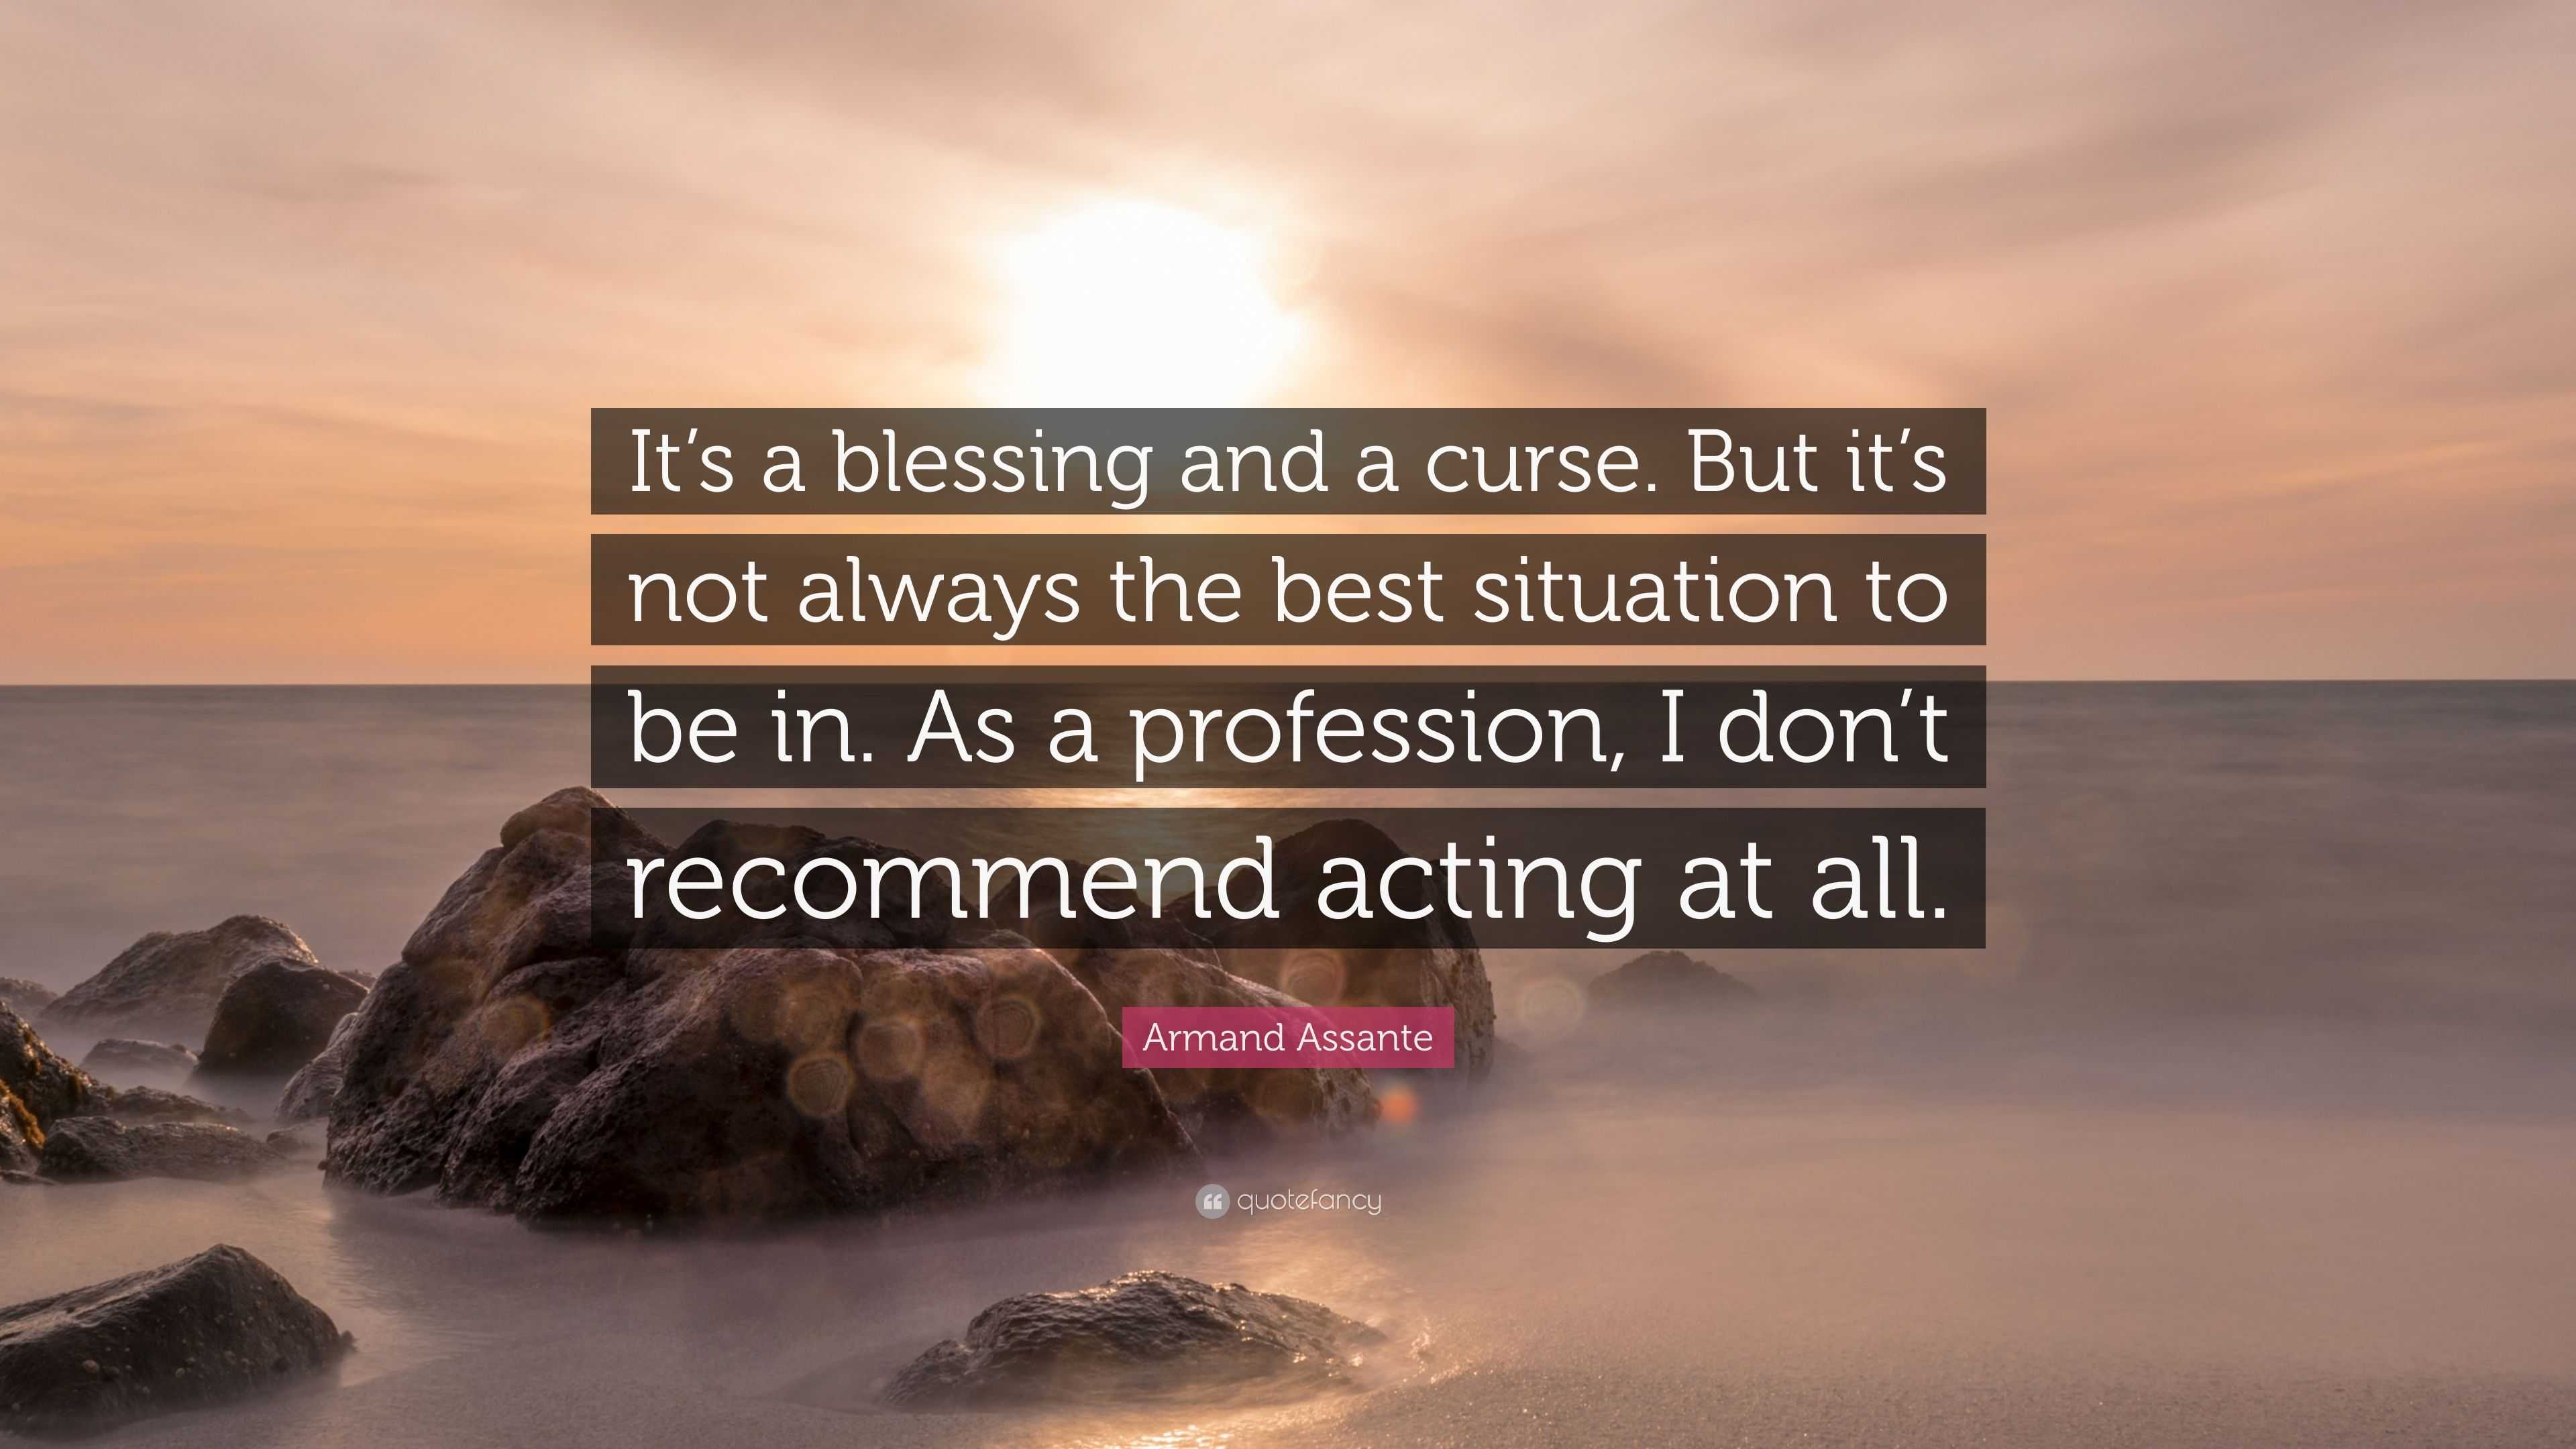 Armand Assante Quote: “It's a blessing and a curse. But it's not